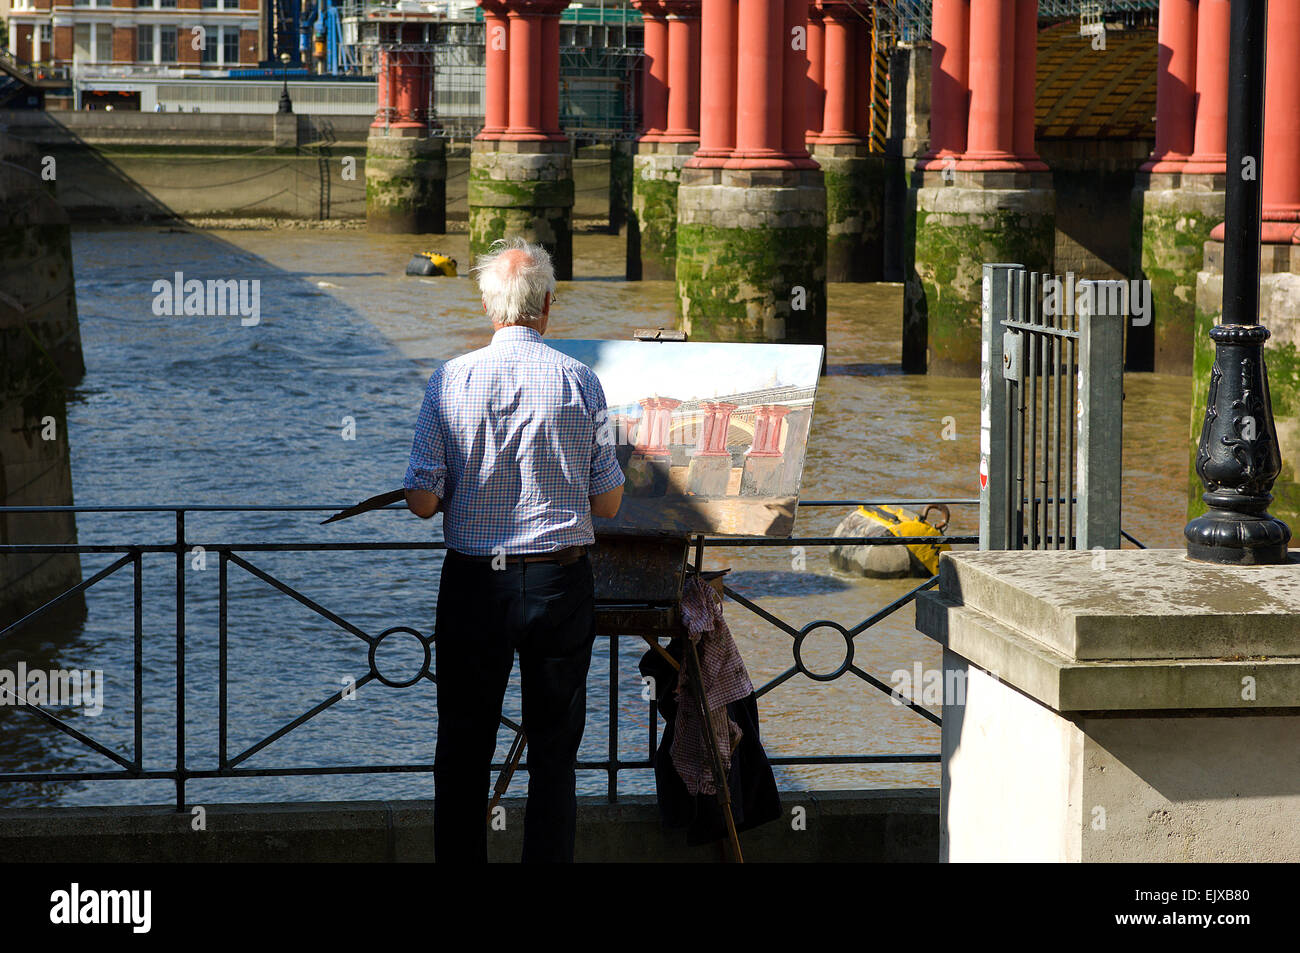 An artist working outdoors in London painting the old Blackfriars Bridge. Stock Photo